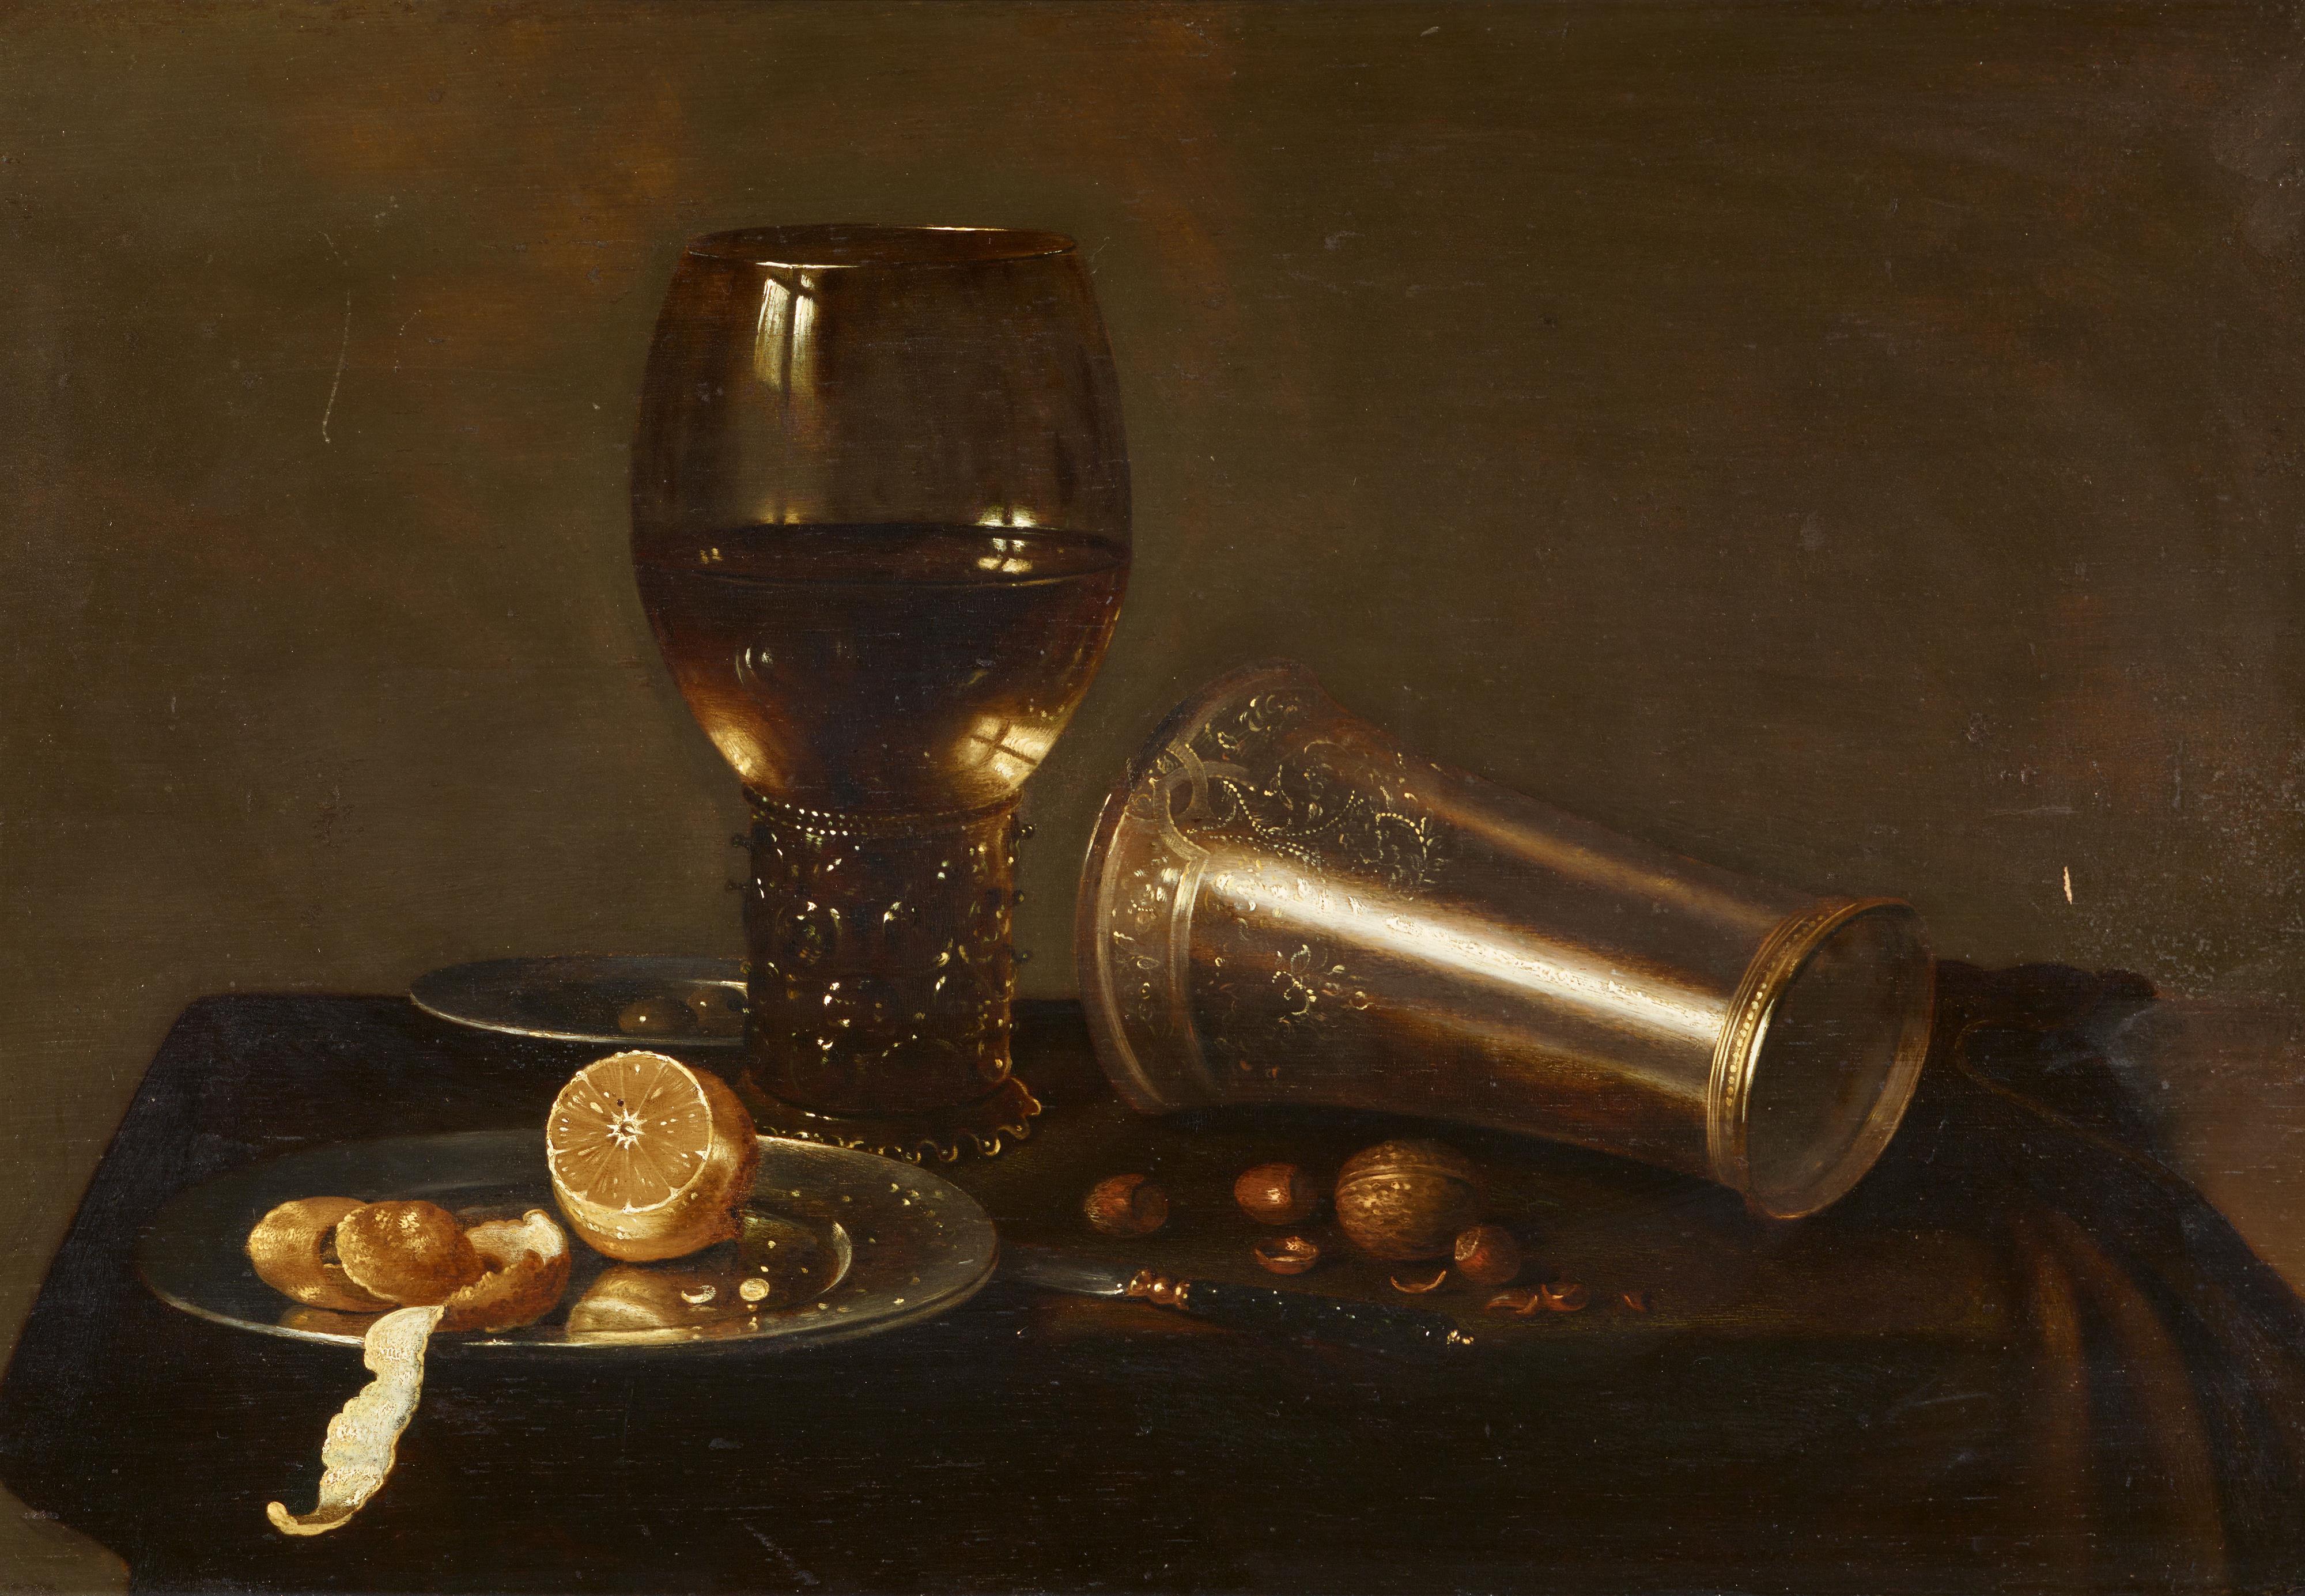 Hans van Sant - Still Life with a Rummer, an Overturned Silver Cup, a Lemon, Olives, Nuts and a Knife - image-1